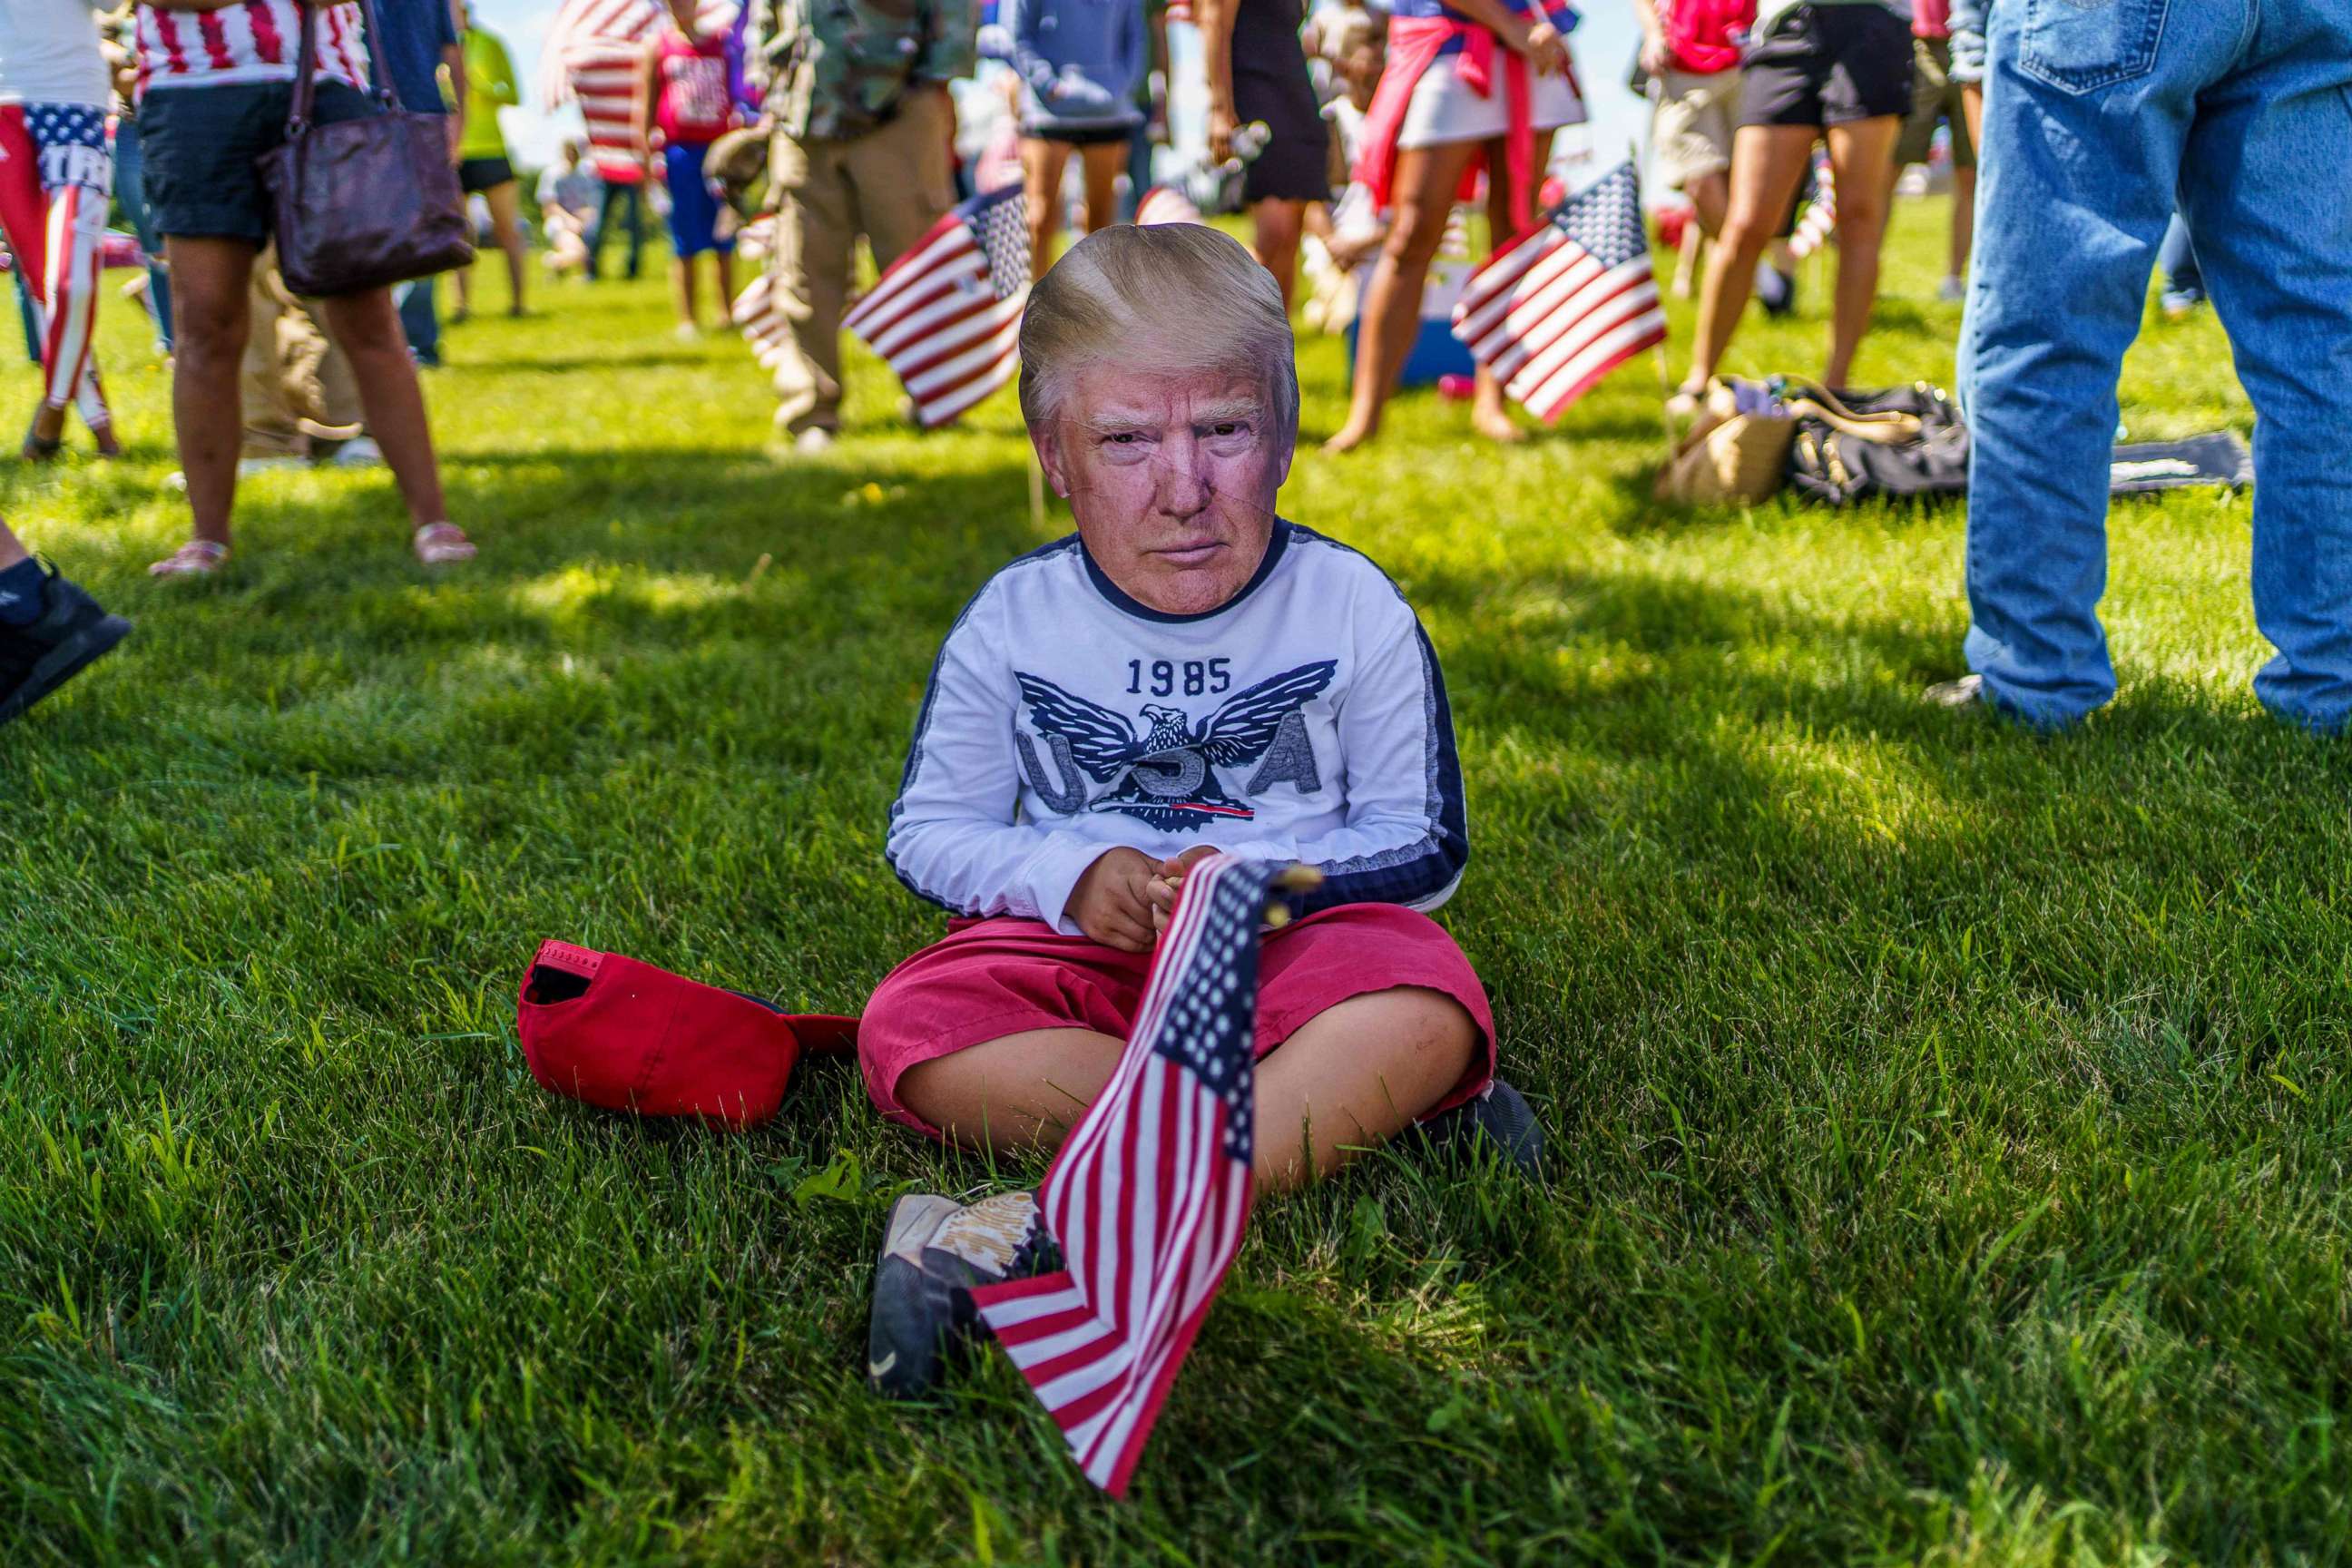 PHOTO: A supporter wears a mask of President Donald Trump on Aug. 17, 2020, in Mankato, Minn.